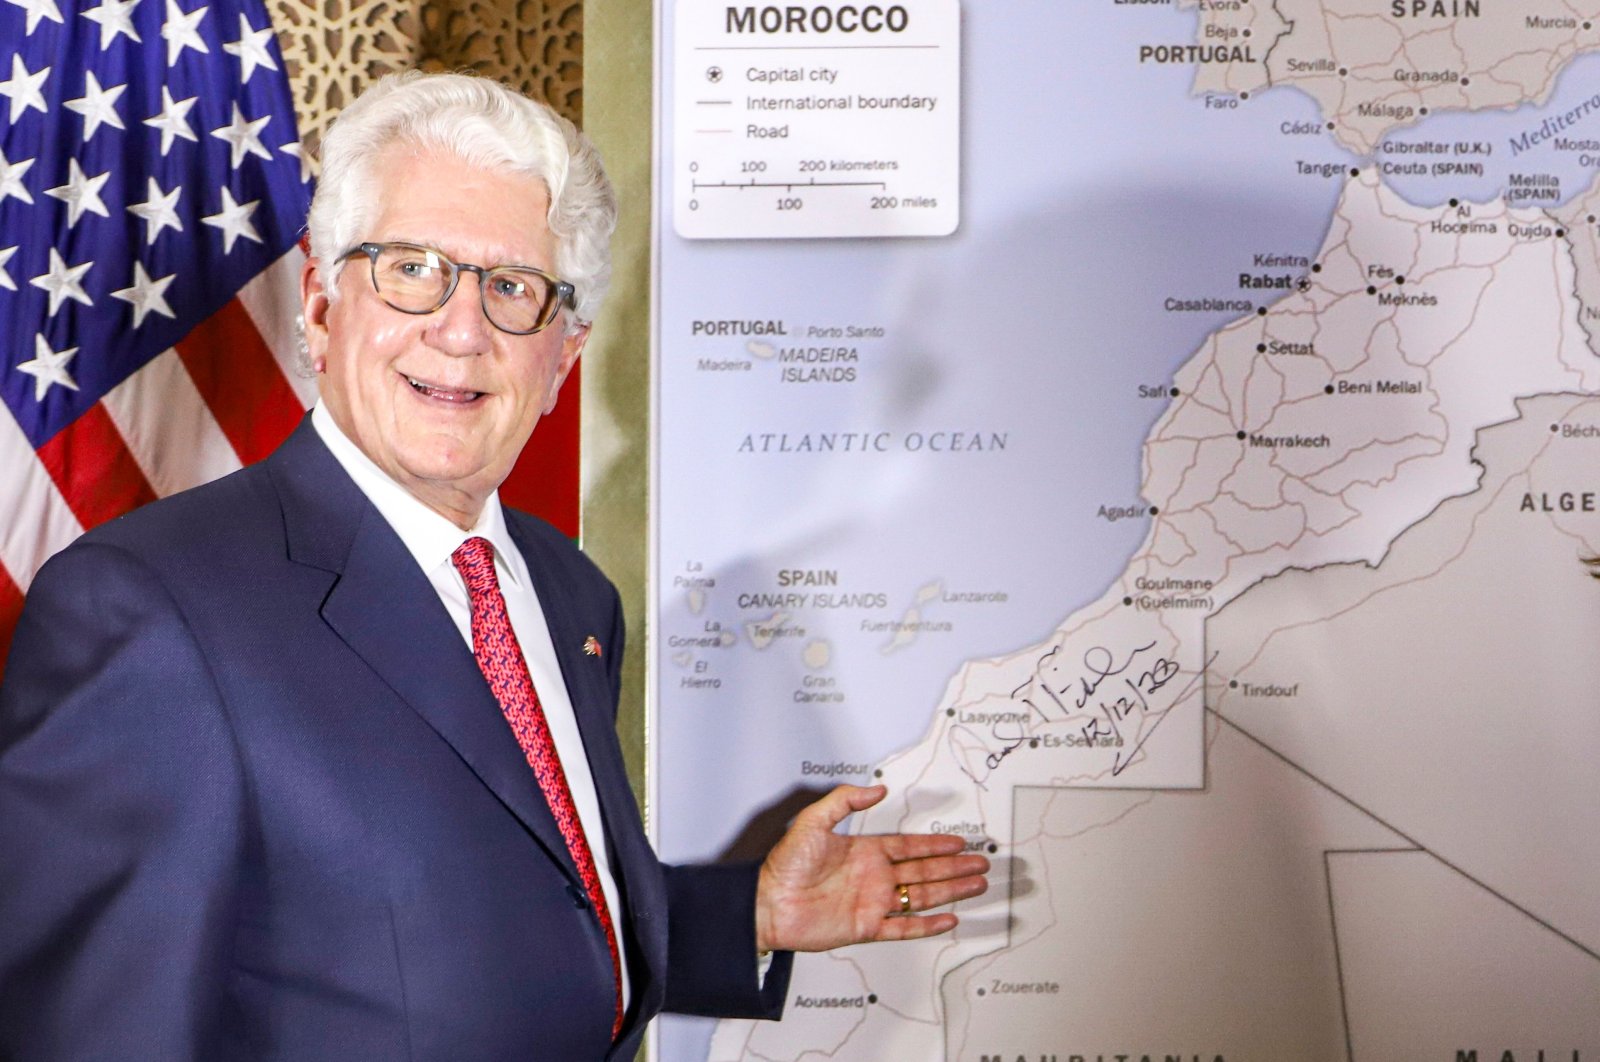 David T. Fischer, U.S. ambassador to the Kingdom of Morocco, stands in front of a U.S. State Department-authorized map of Morocco recognizing the internationally disputed territory Western Sahara as a part of the North African kingdom, in the capital Rabat, Morocco, Dec. 12, 2020. (AFP Photo)